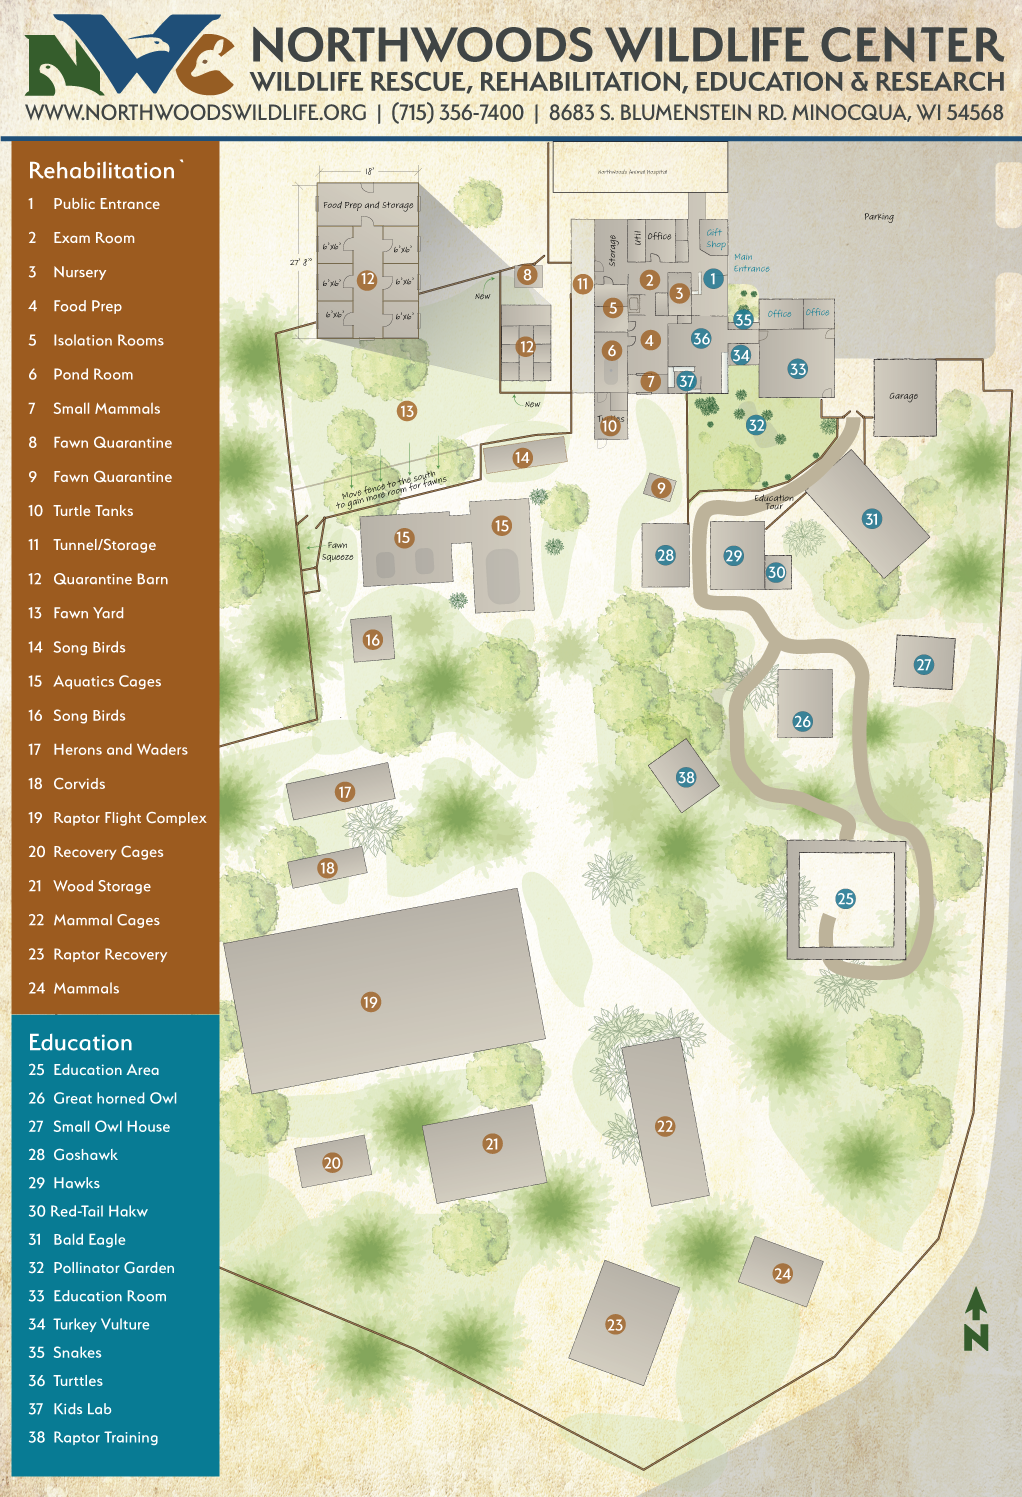 Overview map of the Northwoods Wildlife Center's wildlife rehabilitation facilities and education facilitities